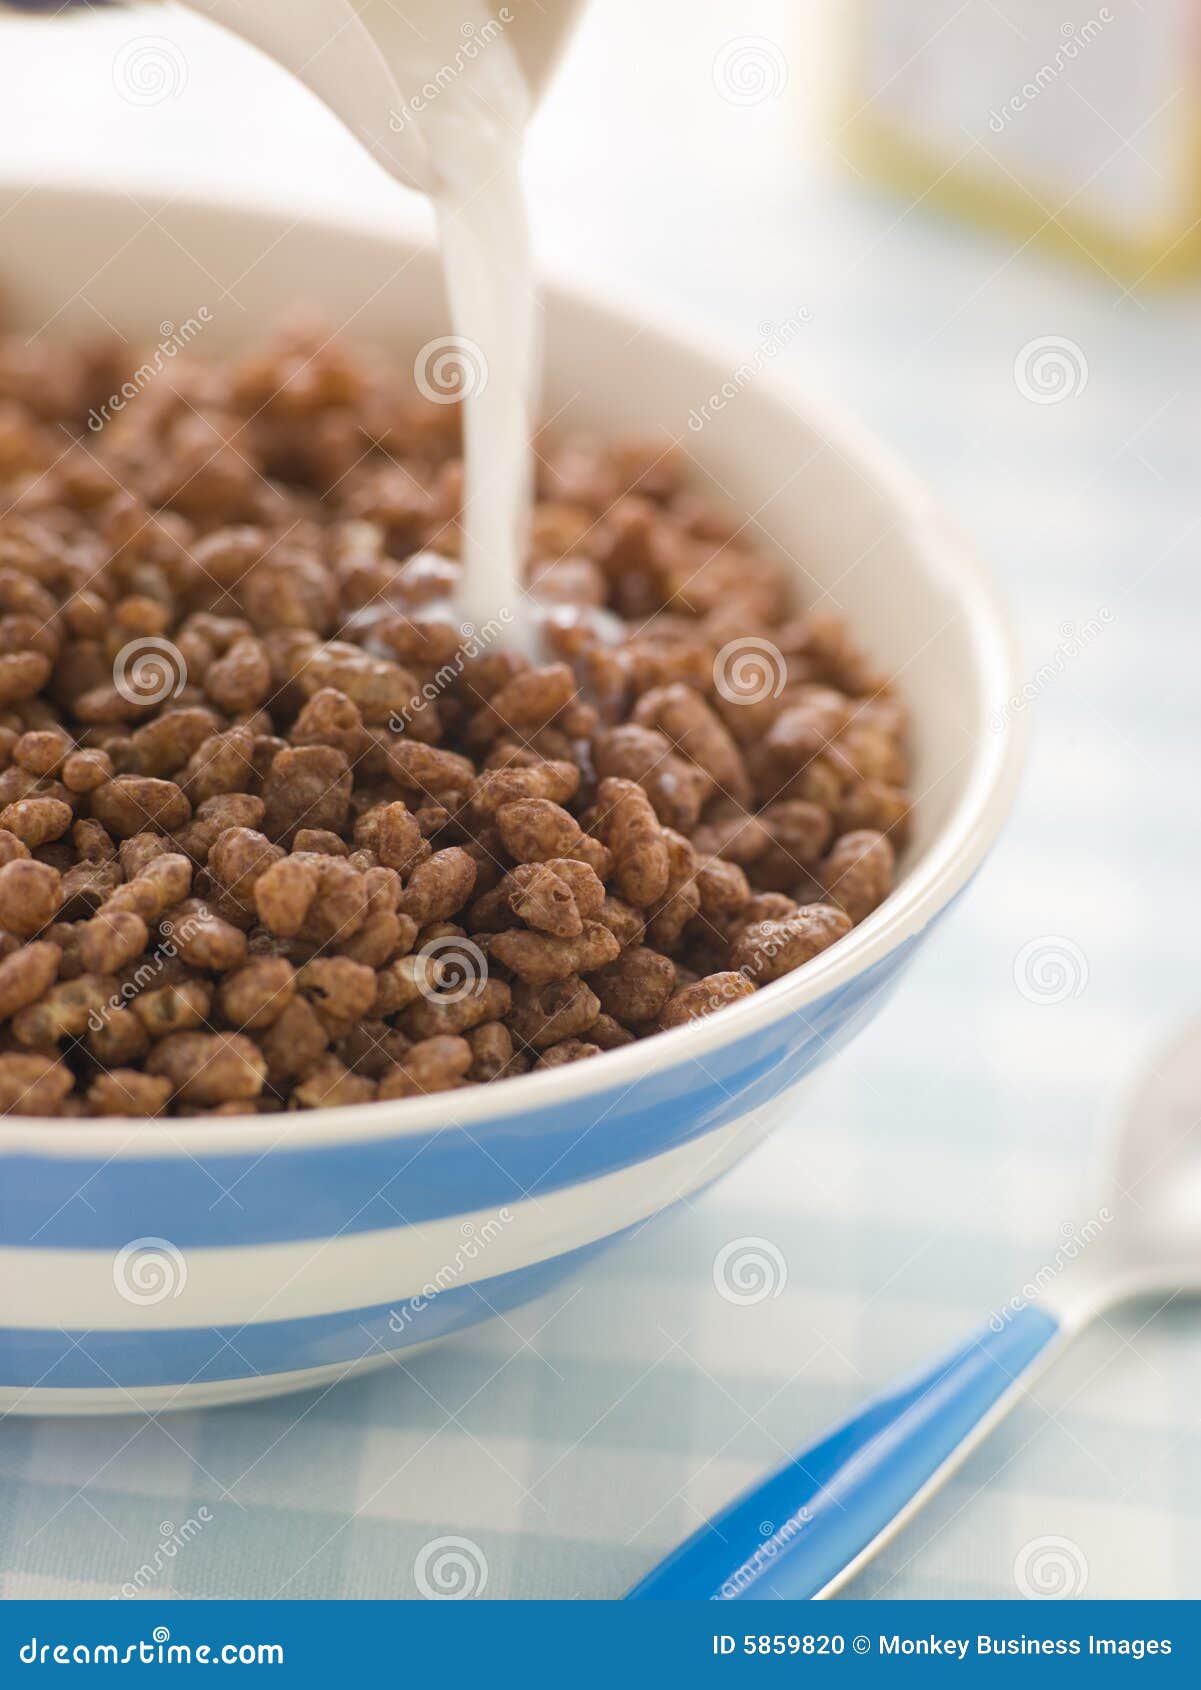 chocolate coated puffed rice cereal